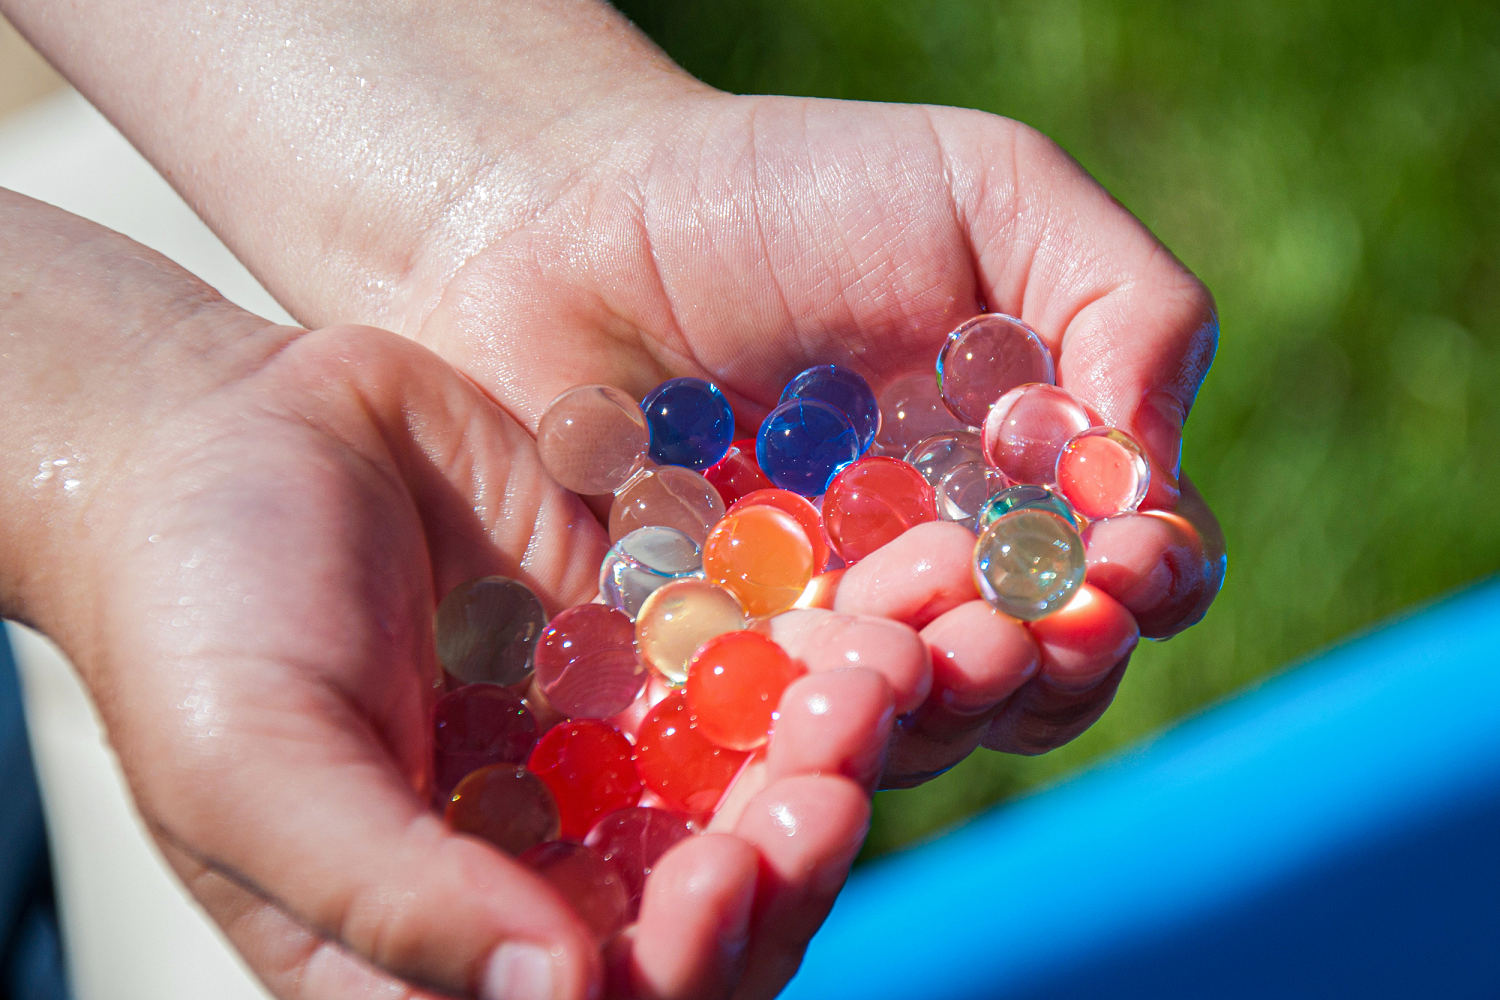 amazon, bill aims to ban potentially hazardous water beads sold as children's toys